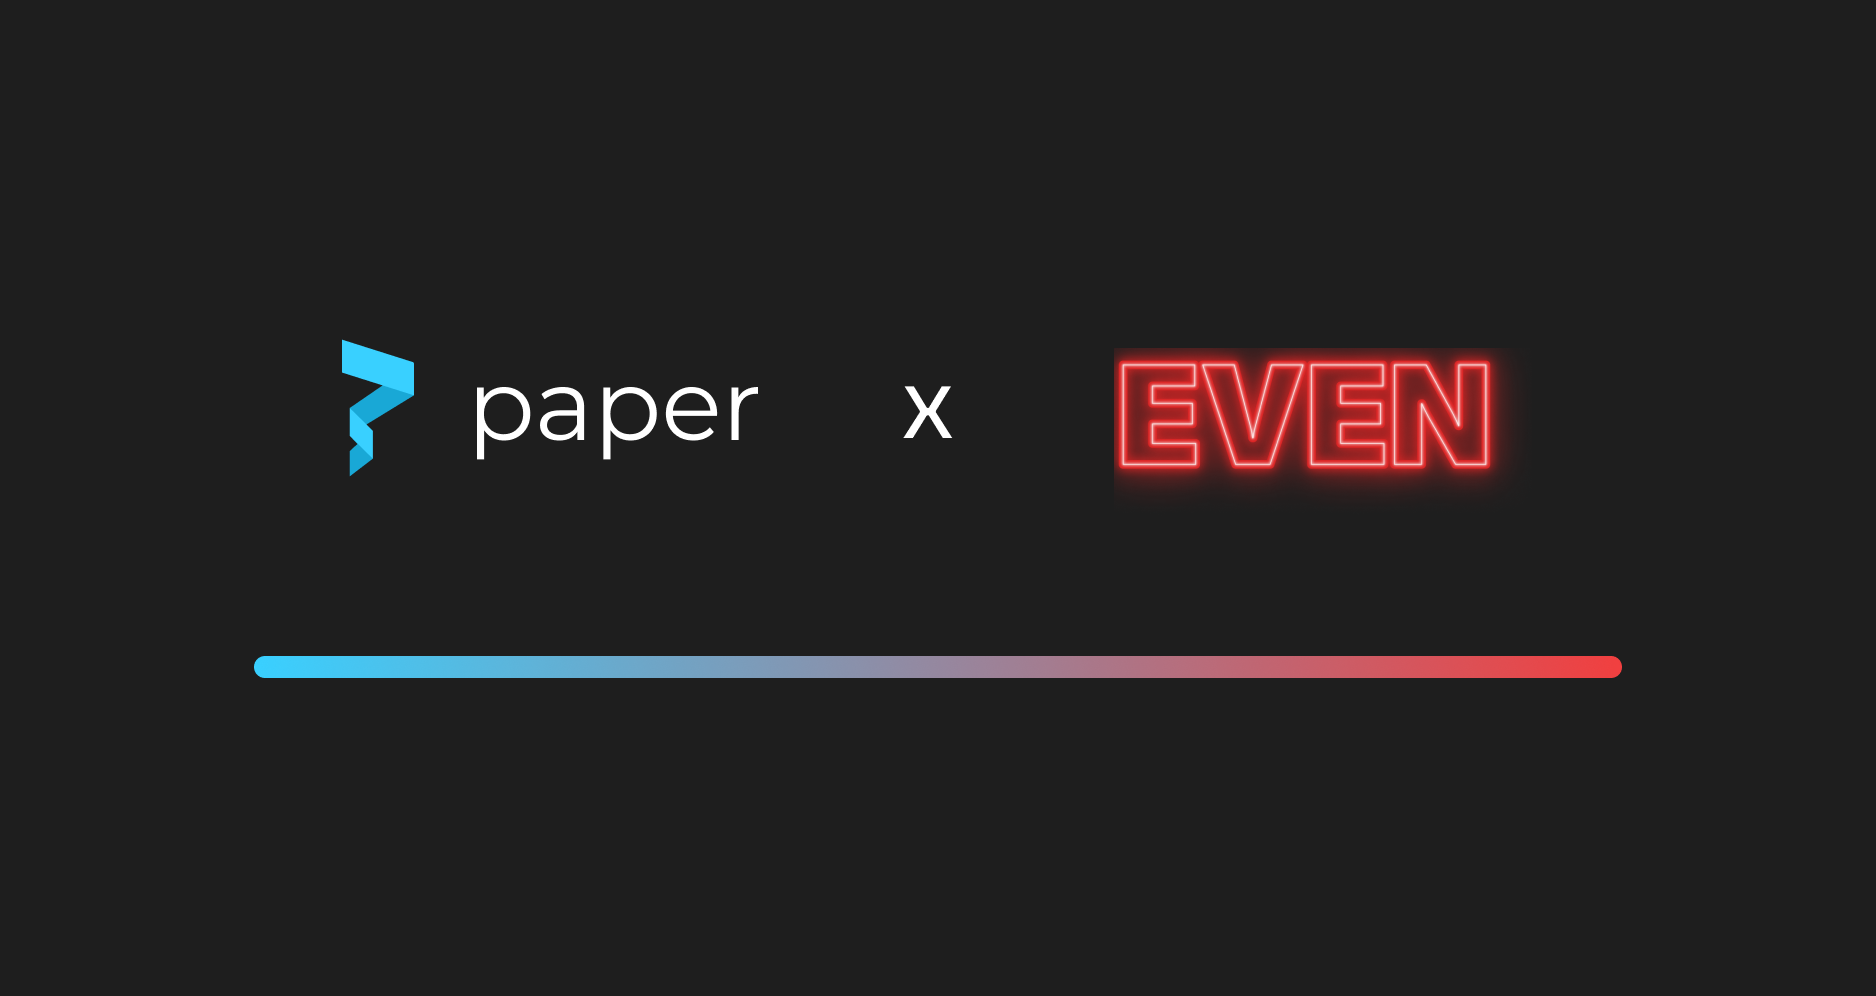 EVEN is using Paper to help music artists tap into their communities